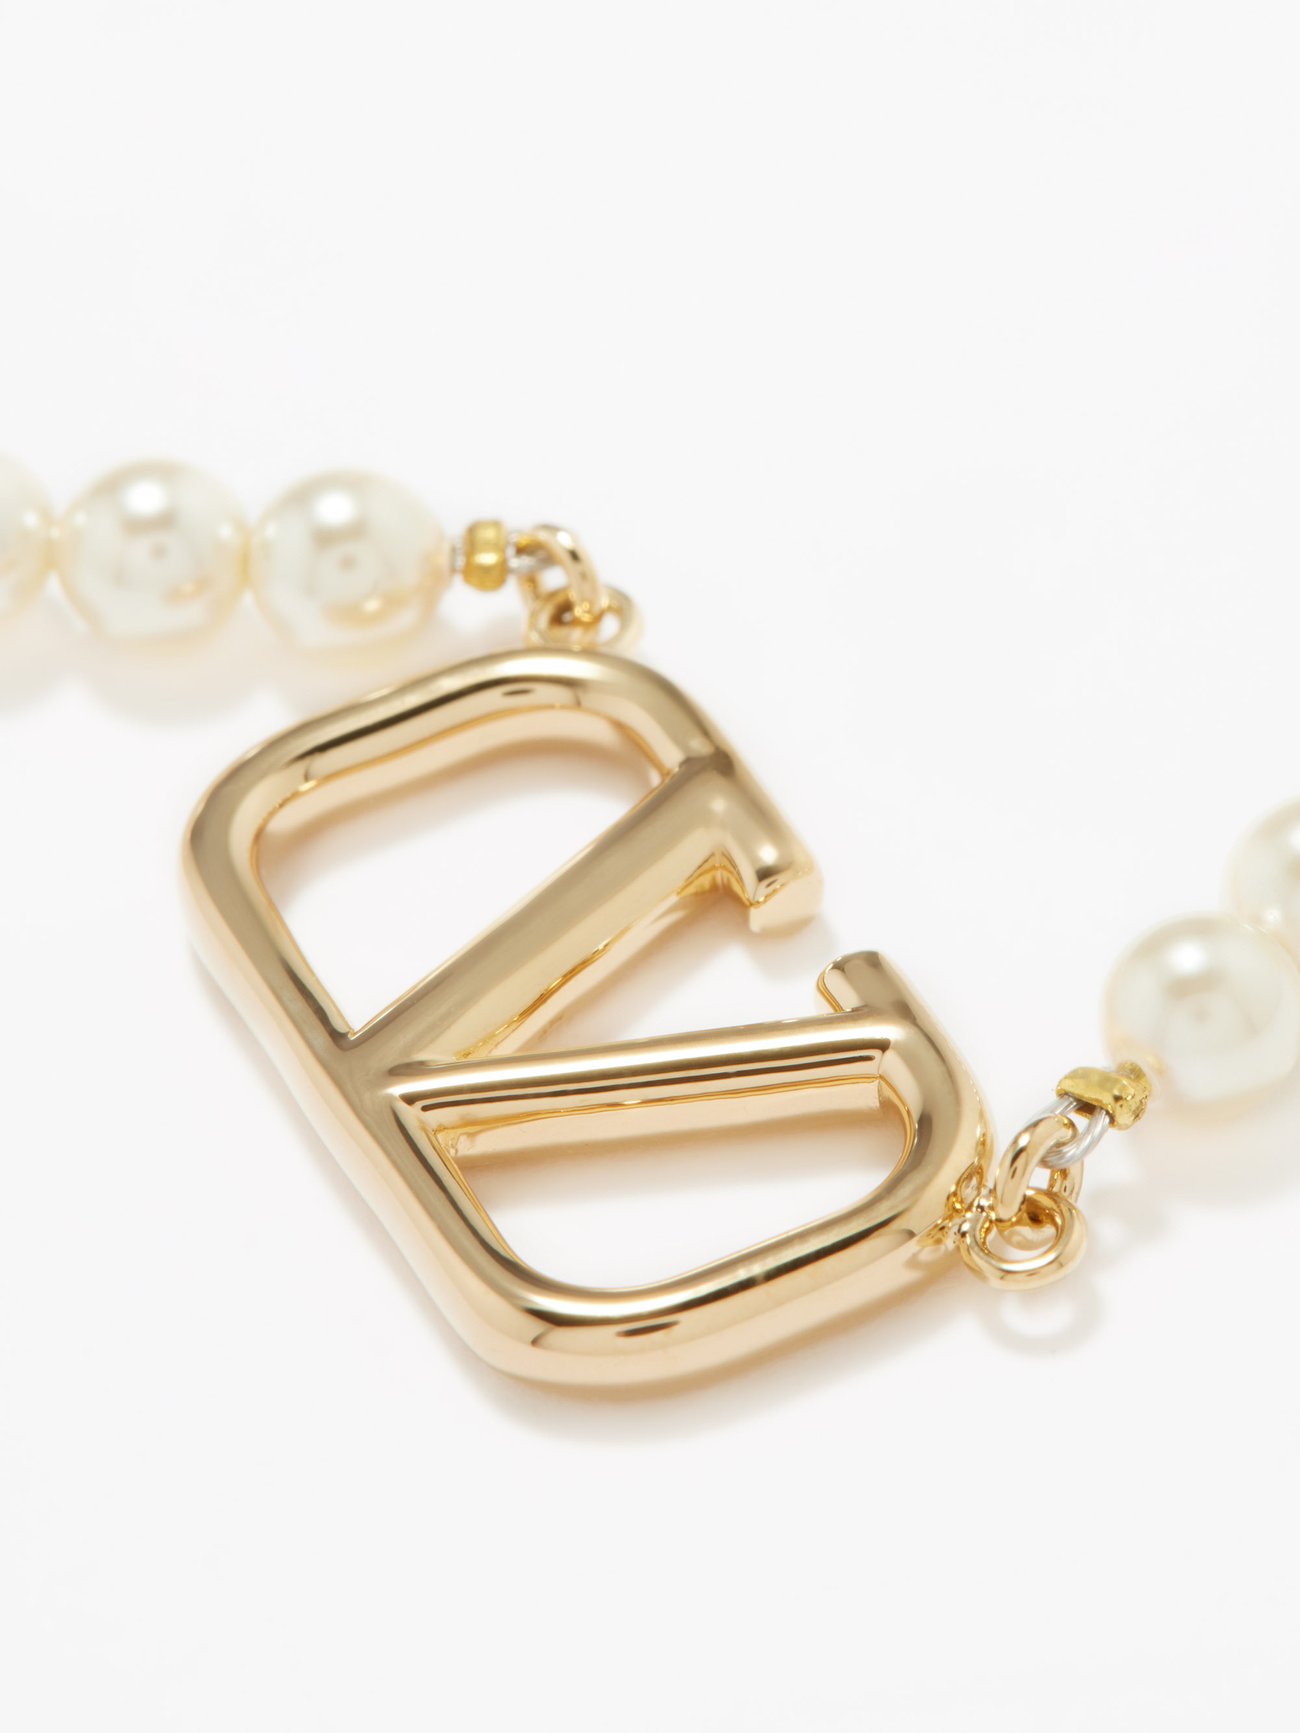 V Logo Faux Pearl And Crystal Ring in Gold - Valentino